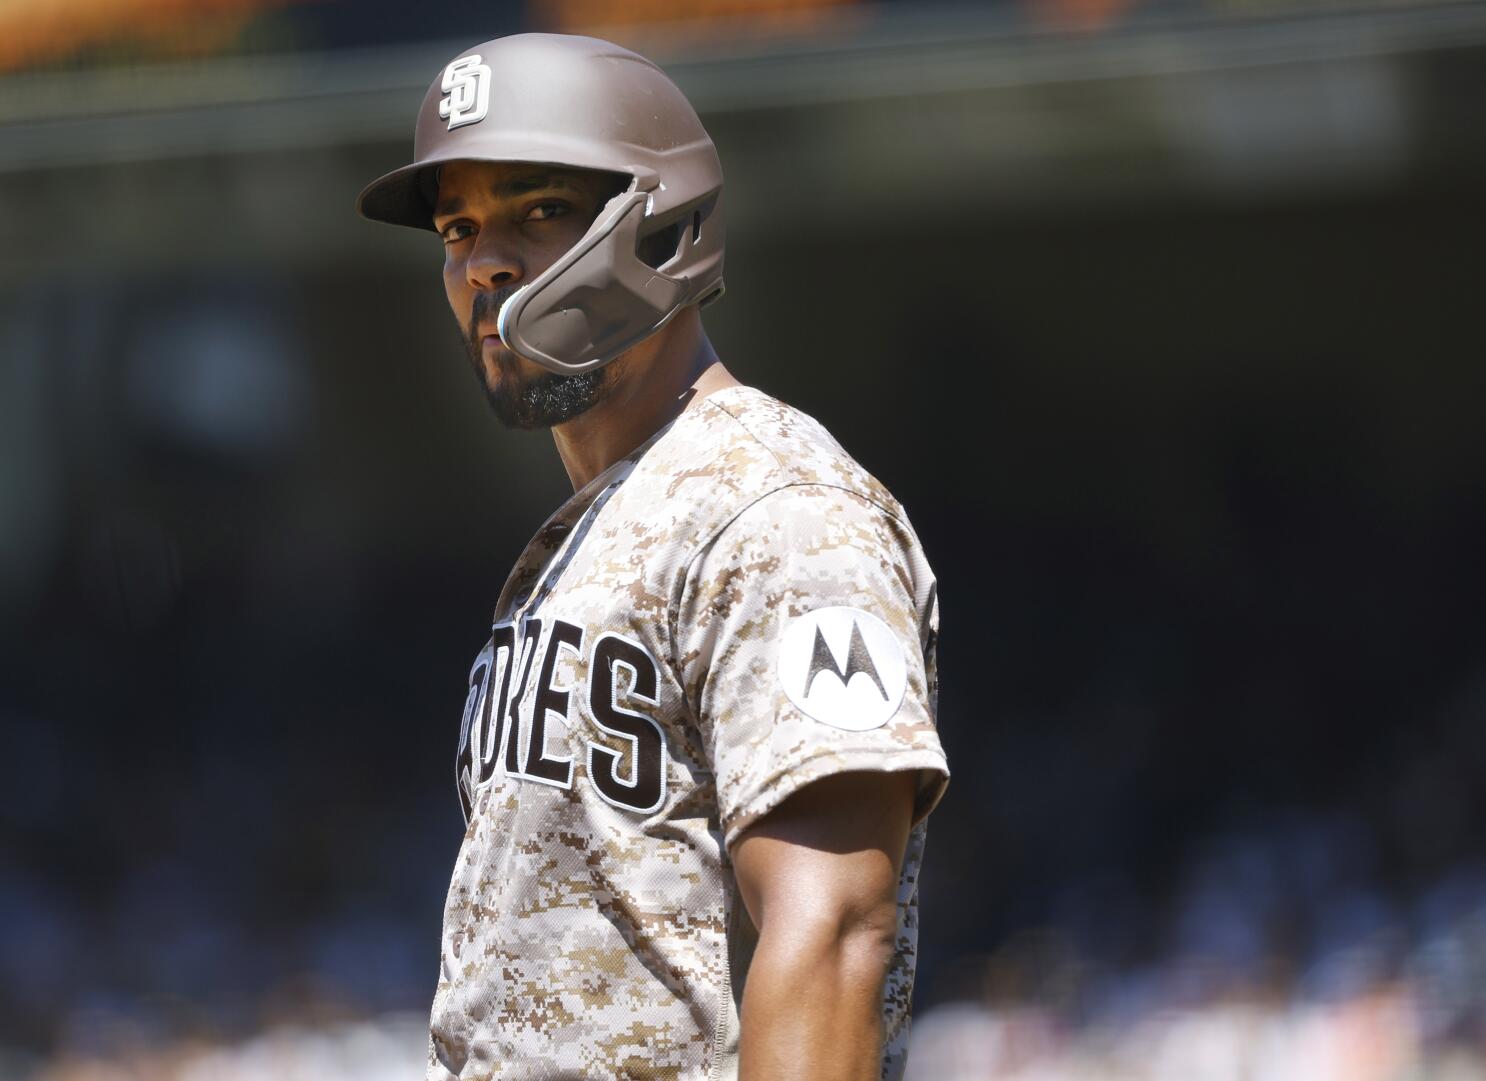 With Xander Bogaerts, Padres looking to shake up 2023 lineup